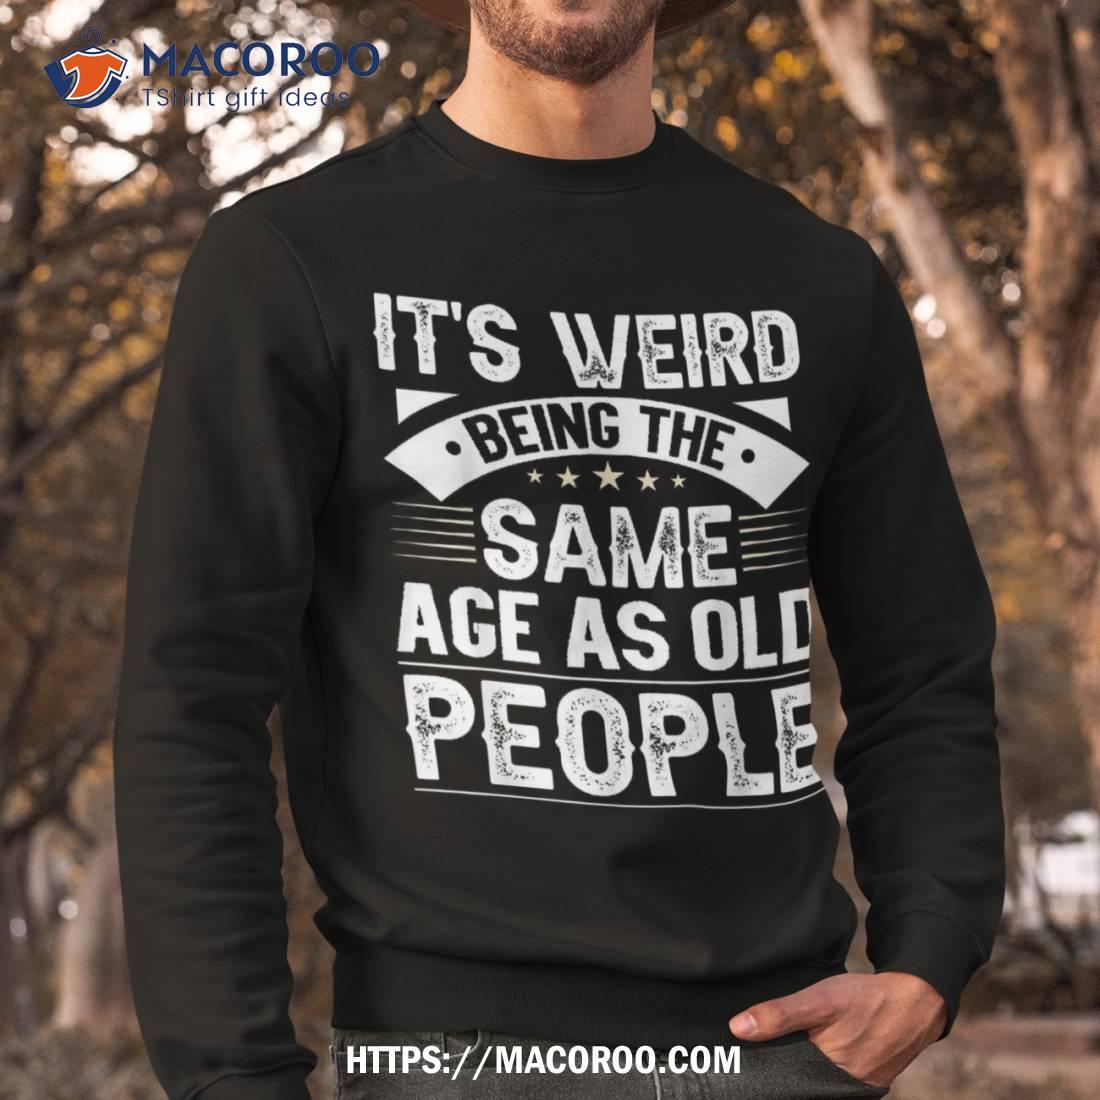 https://images.macoroo.com/wp-content/uploads/2023/08/it-s-weird-being-the-same-age-as-old-people-retro-shirt-cool-fathers-day-gifts-sweatshirt.jpg